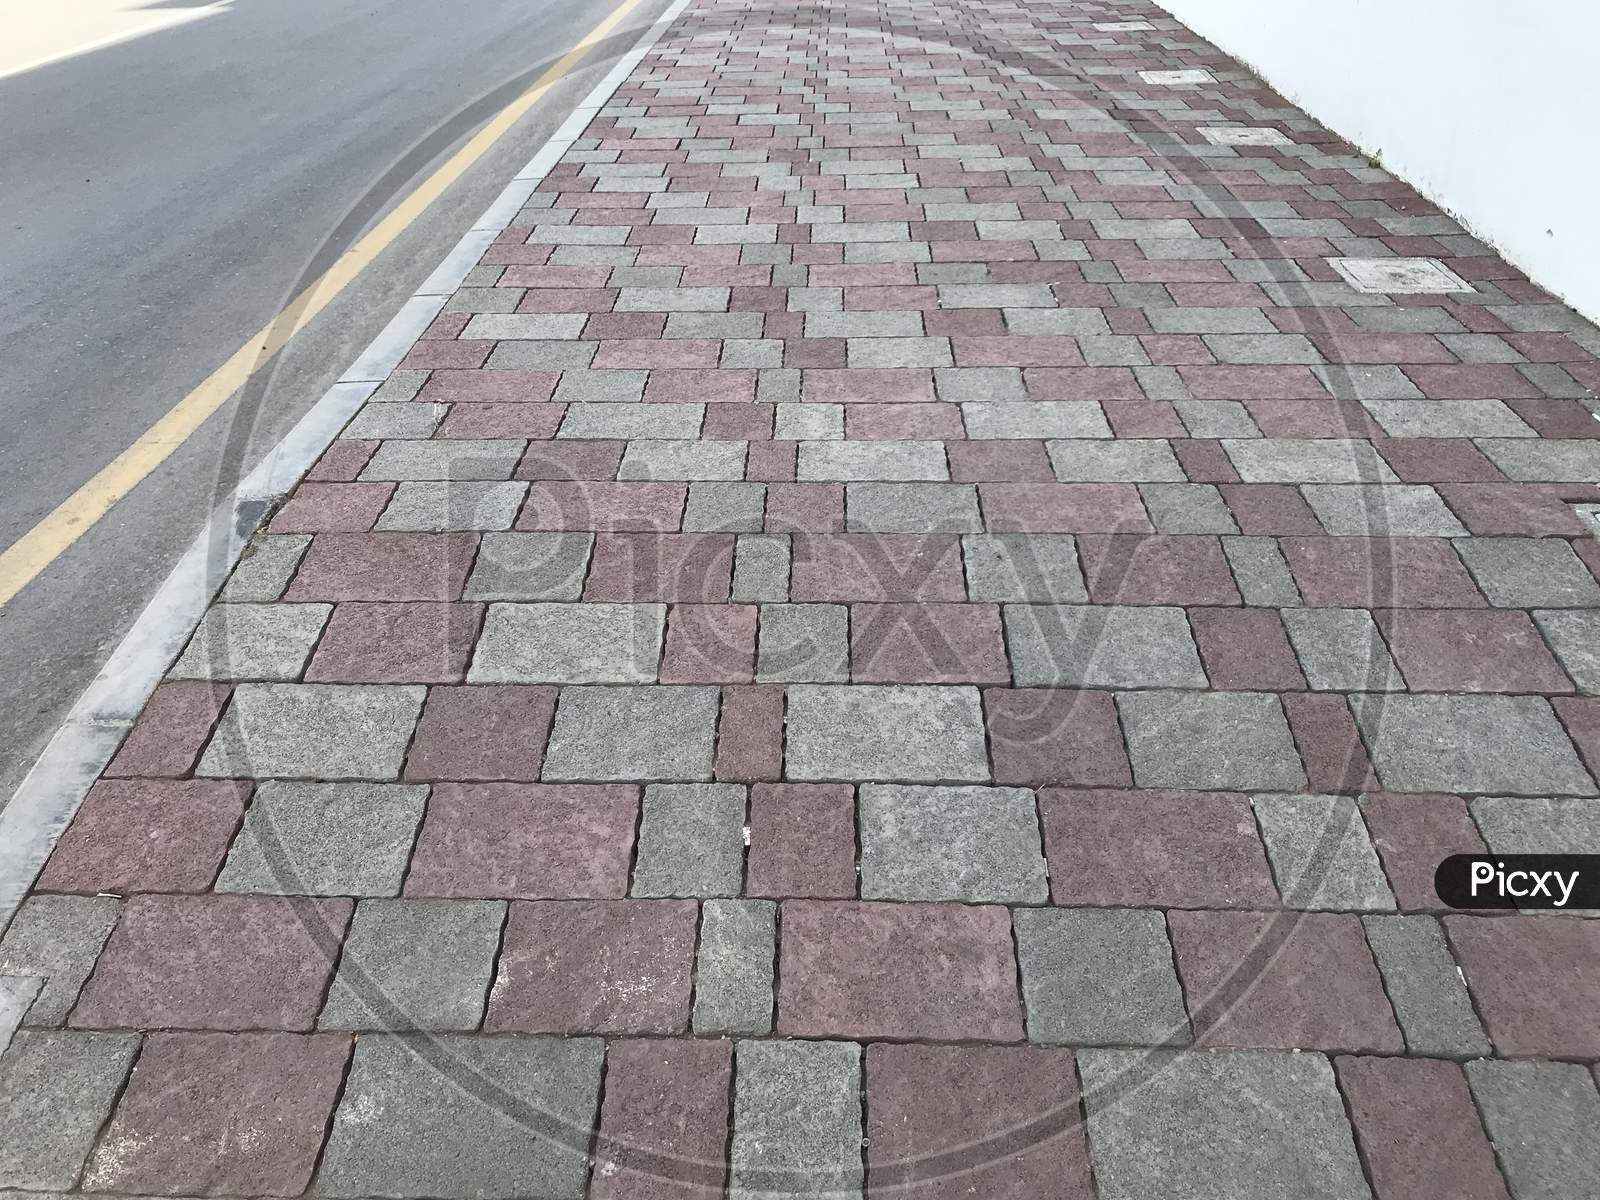 Interlock Tile Flooring And Protected By Kerb Precast Concrete Stones Before The Highways Or Roadways Infrastructure